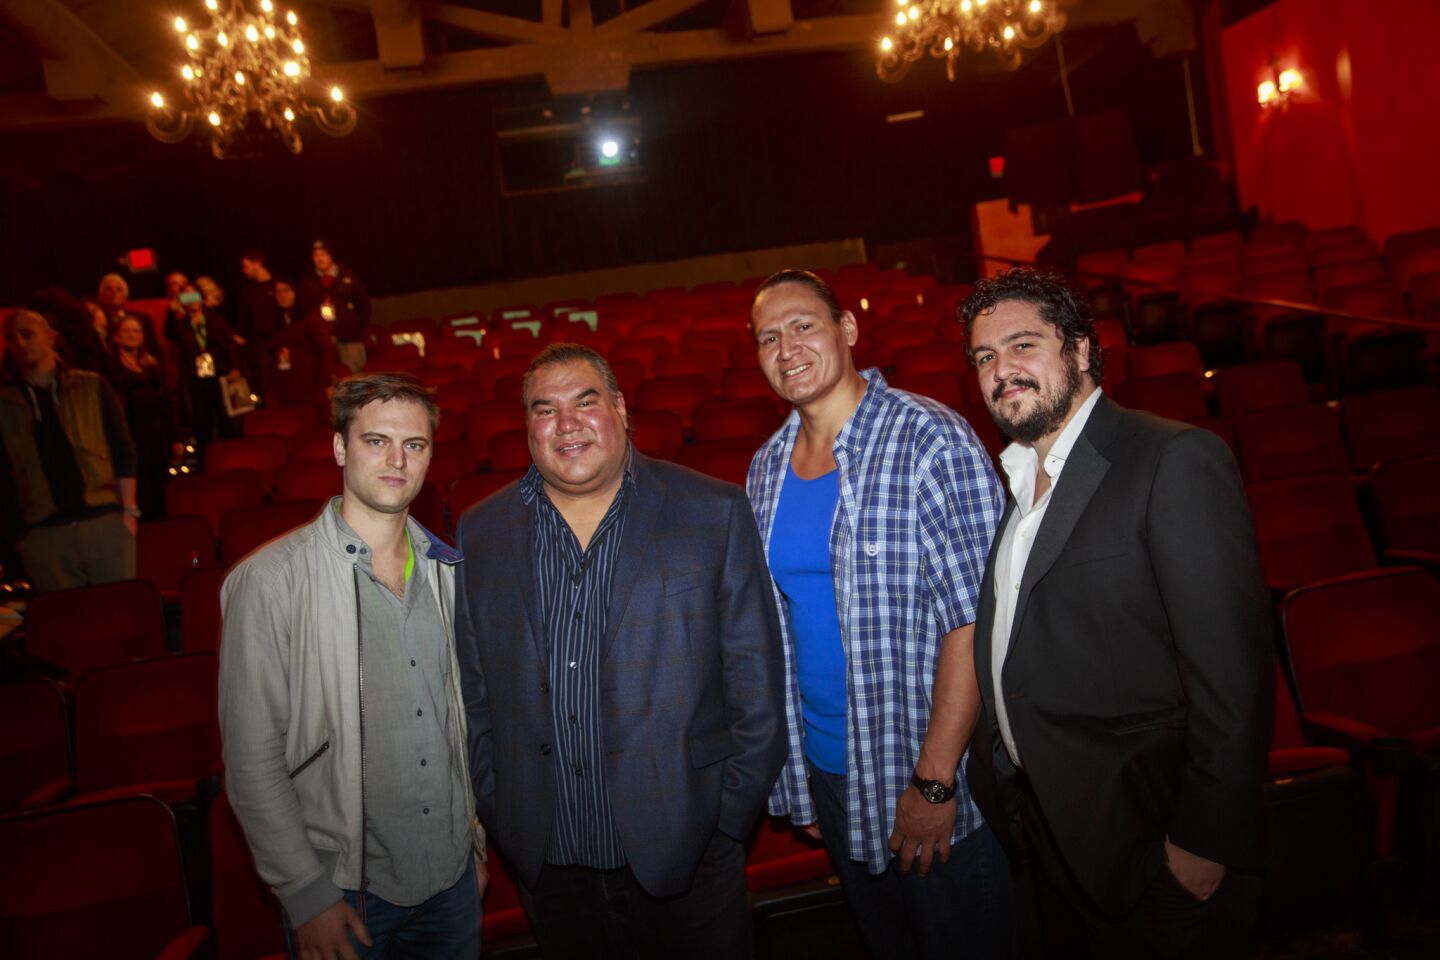 Director Jack Pettibone Riccobono, from left, executive producer Chris Eyre, subject Rob Brown and producer Shane Slattery-Quintanilla before the screening of their documentary "The Seventh Fire" at the 2016 Palm Springs International Film Festival.